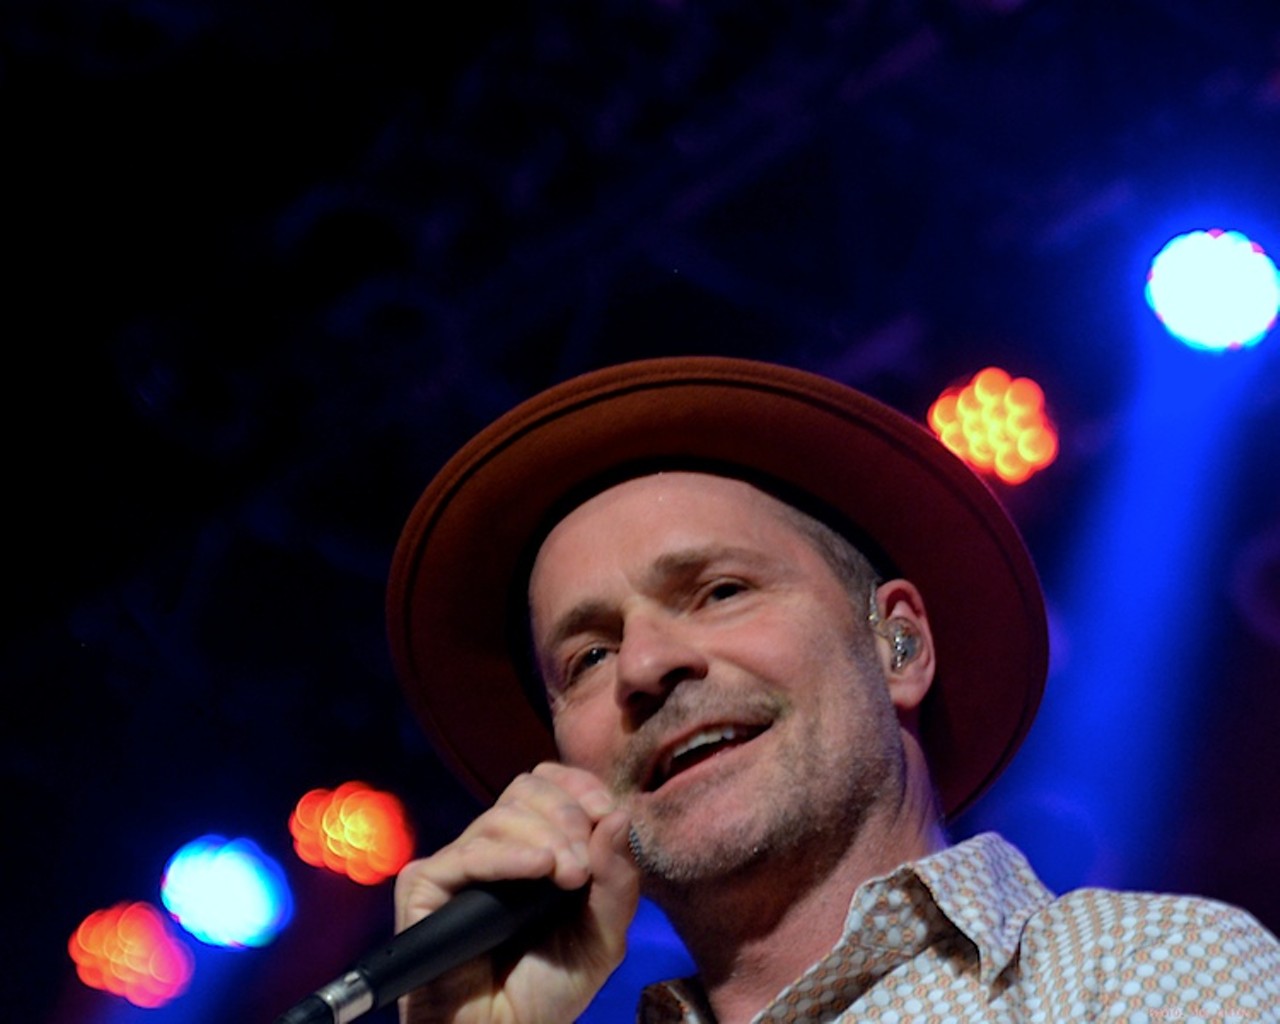 16 Photos of the Tragically Hip Performing at House of Blues